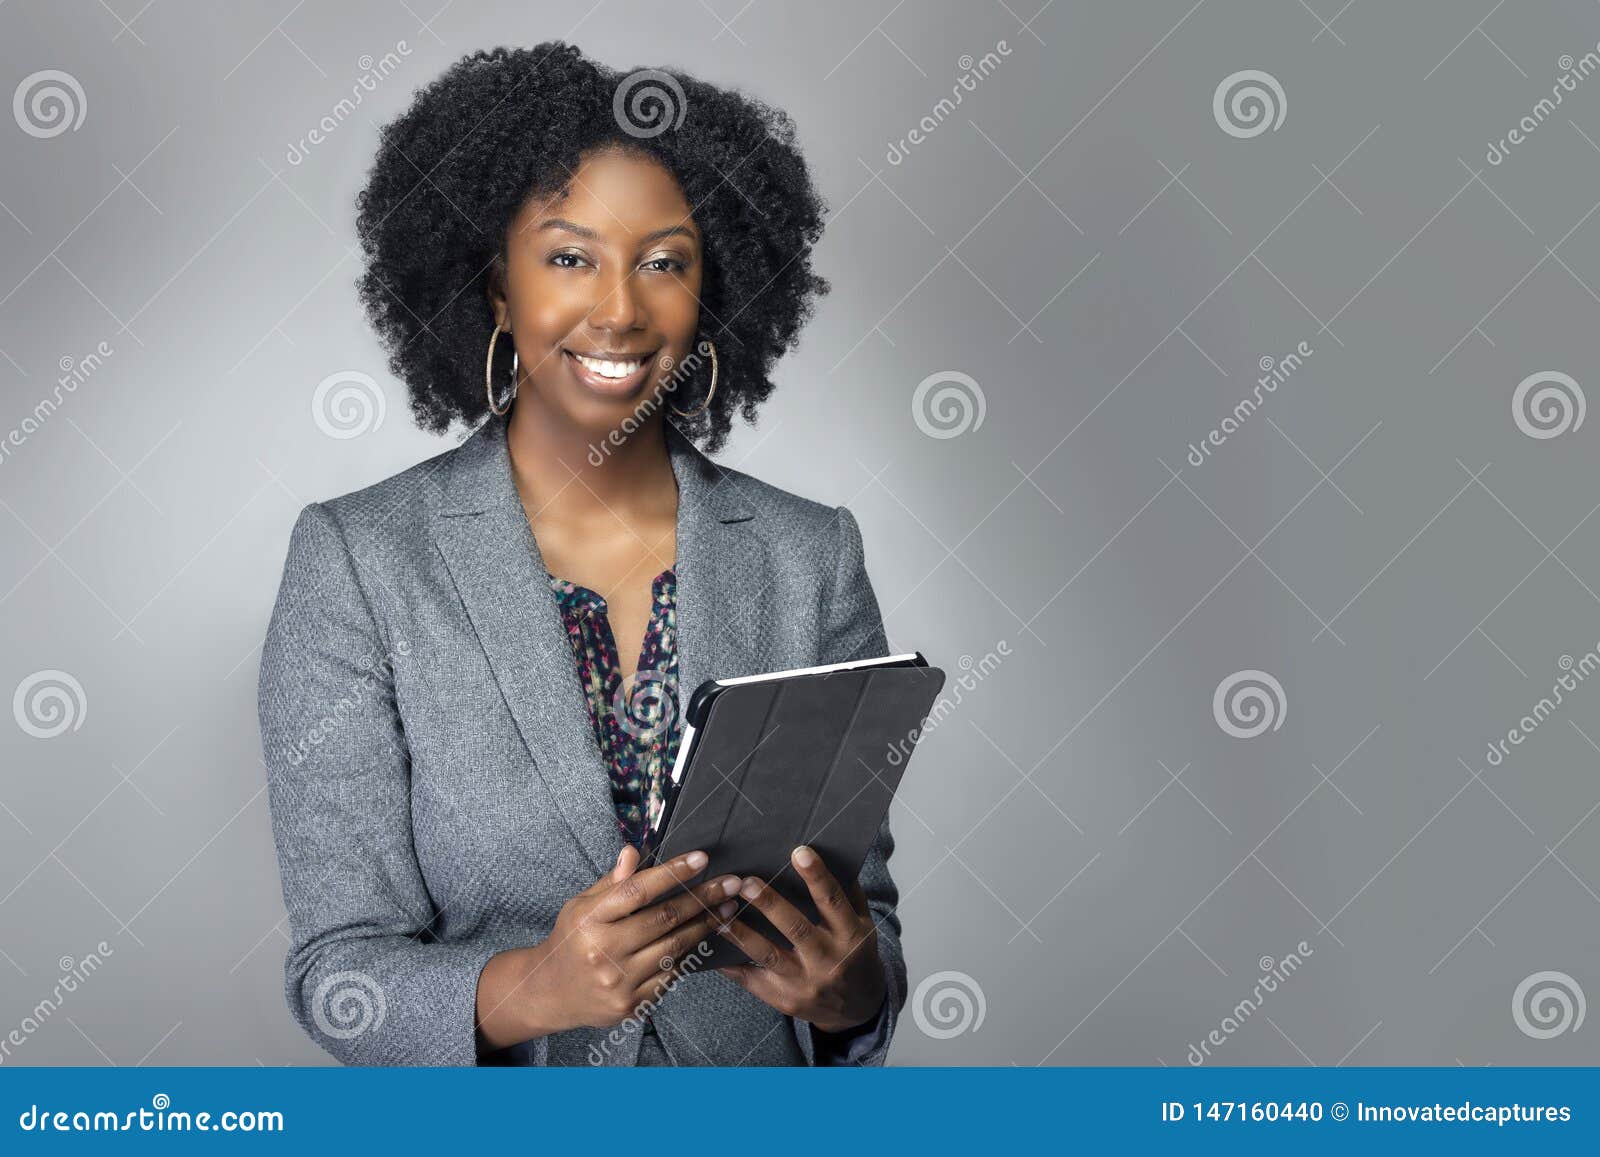 female author or businesswoman keynote speaker with tablet